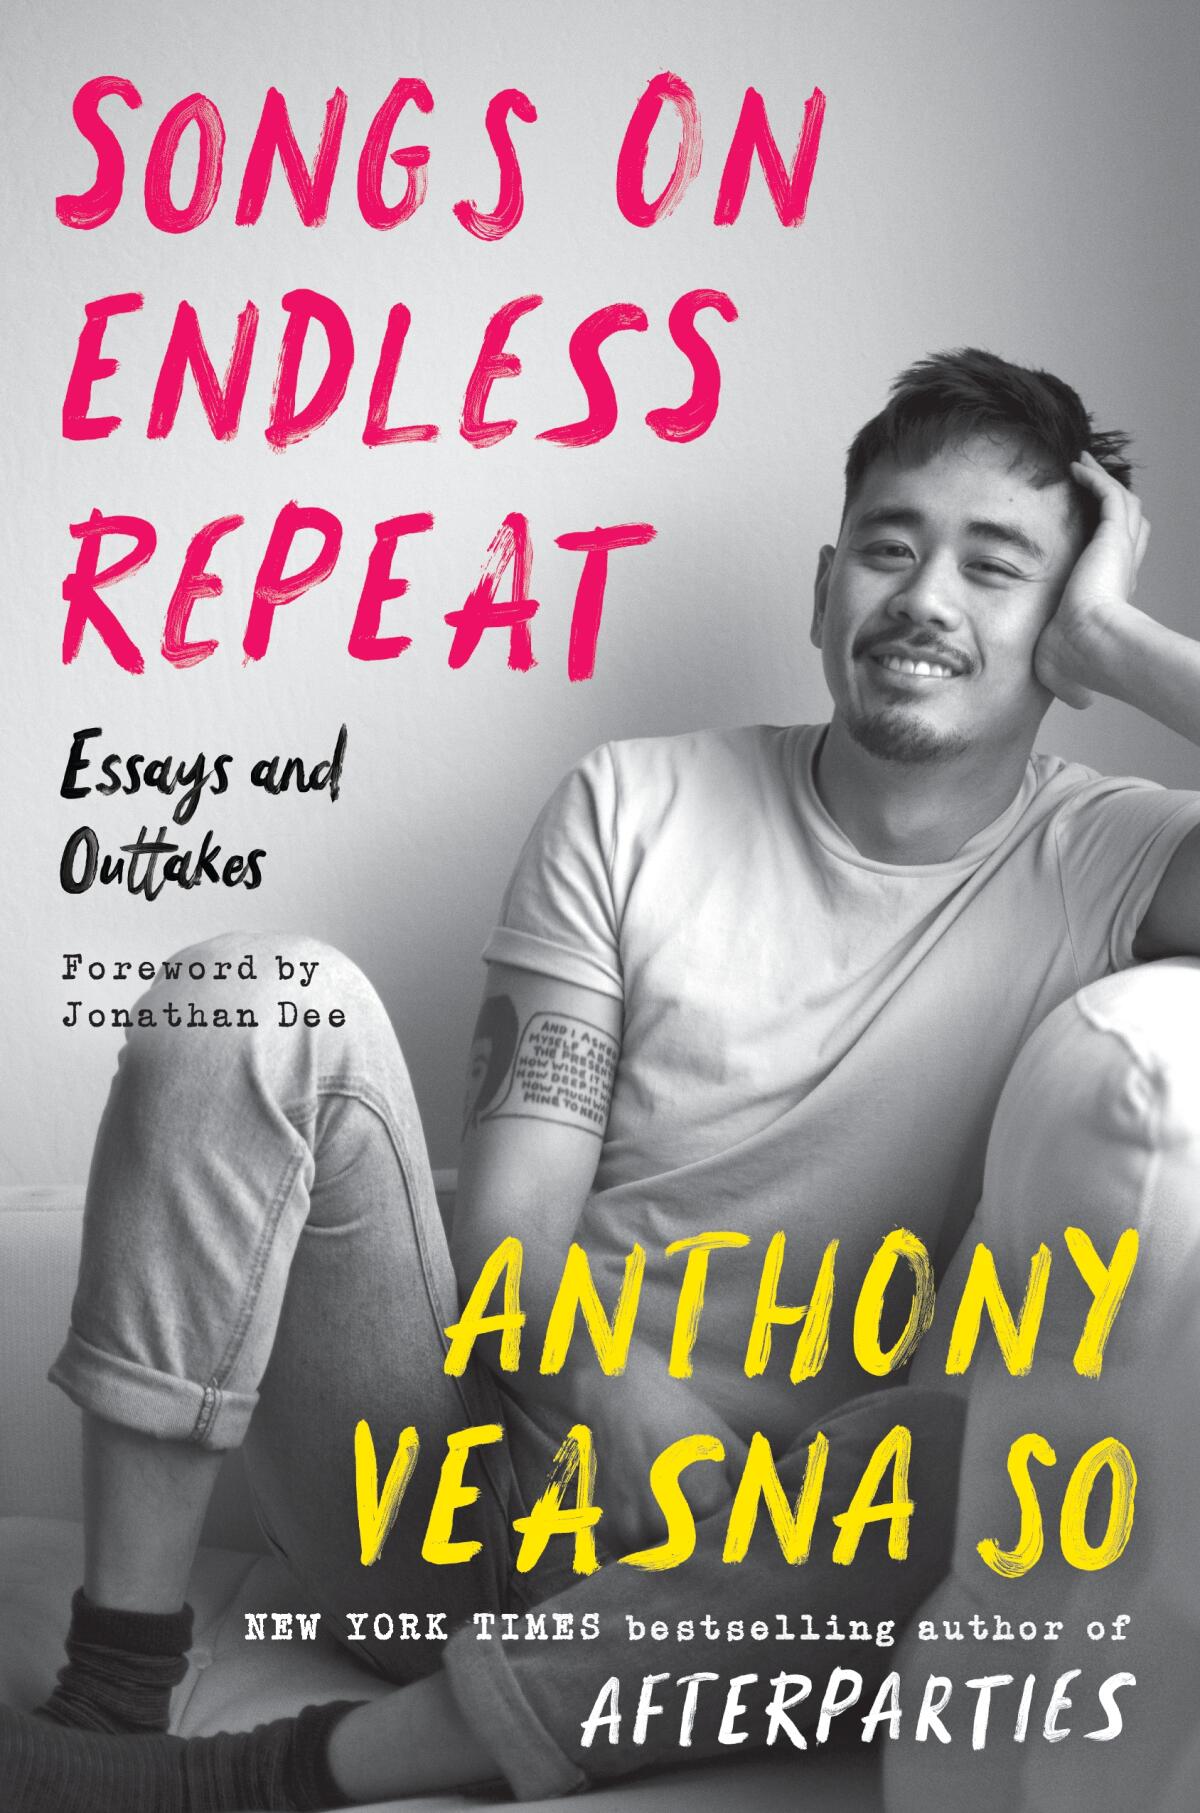 "Songs on Endless Repeat" by Anthony Veasna So